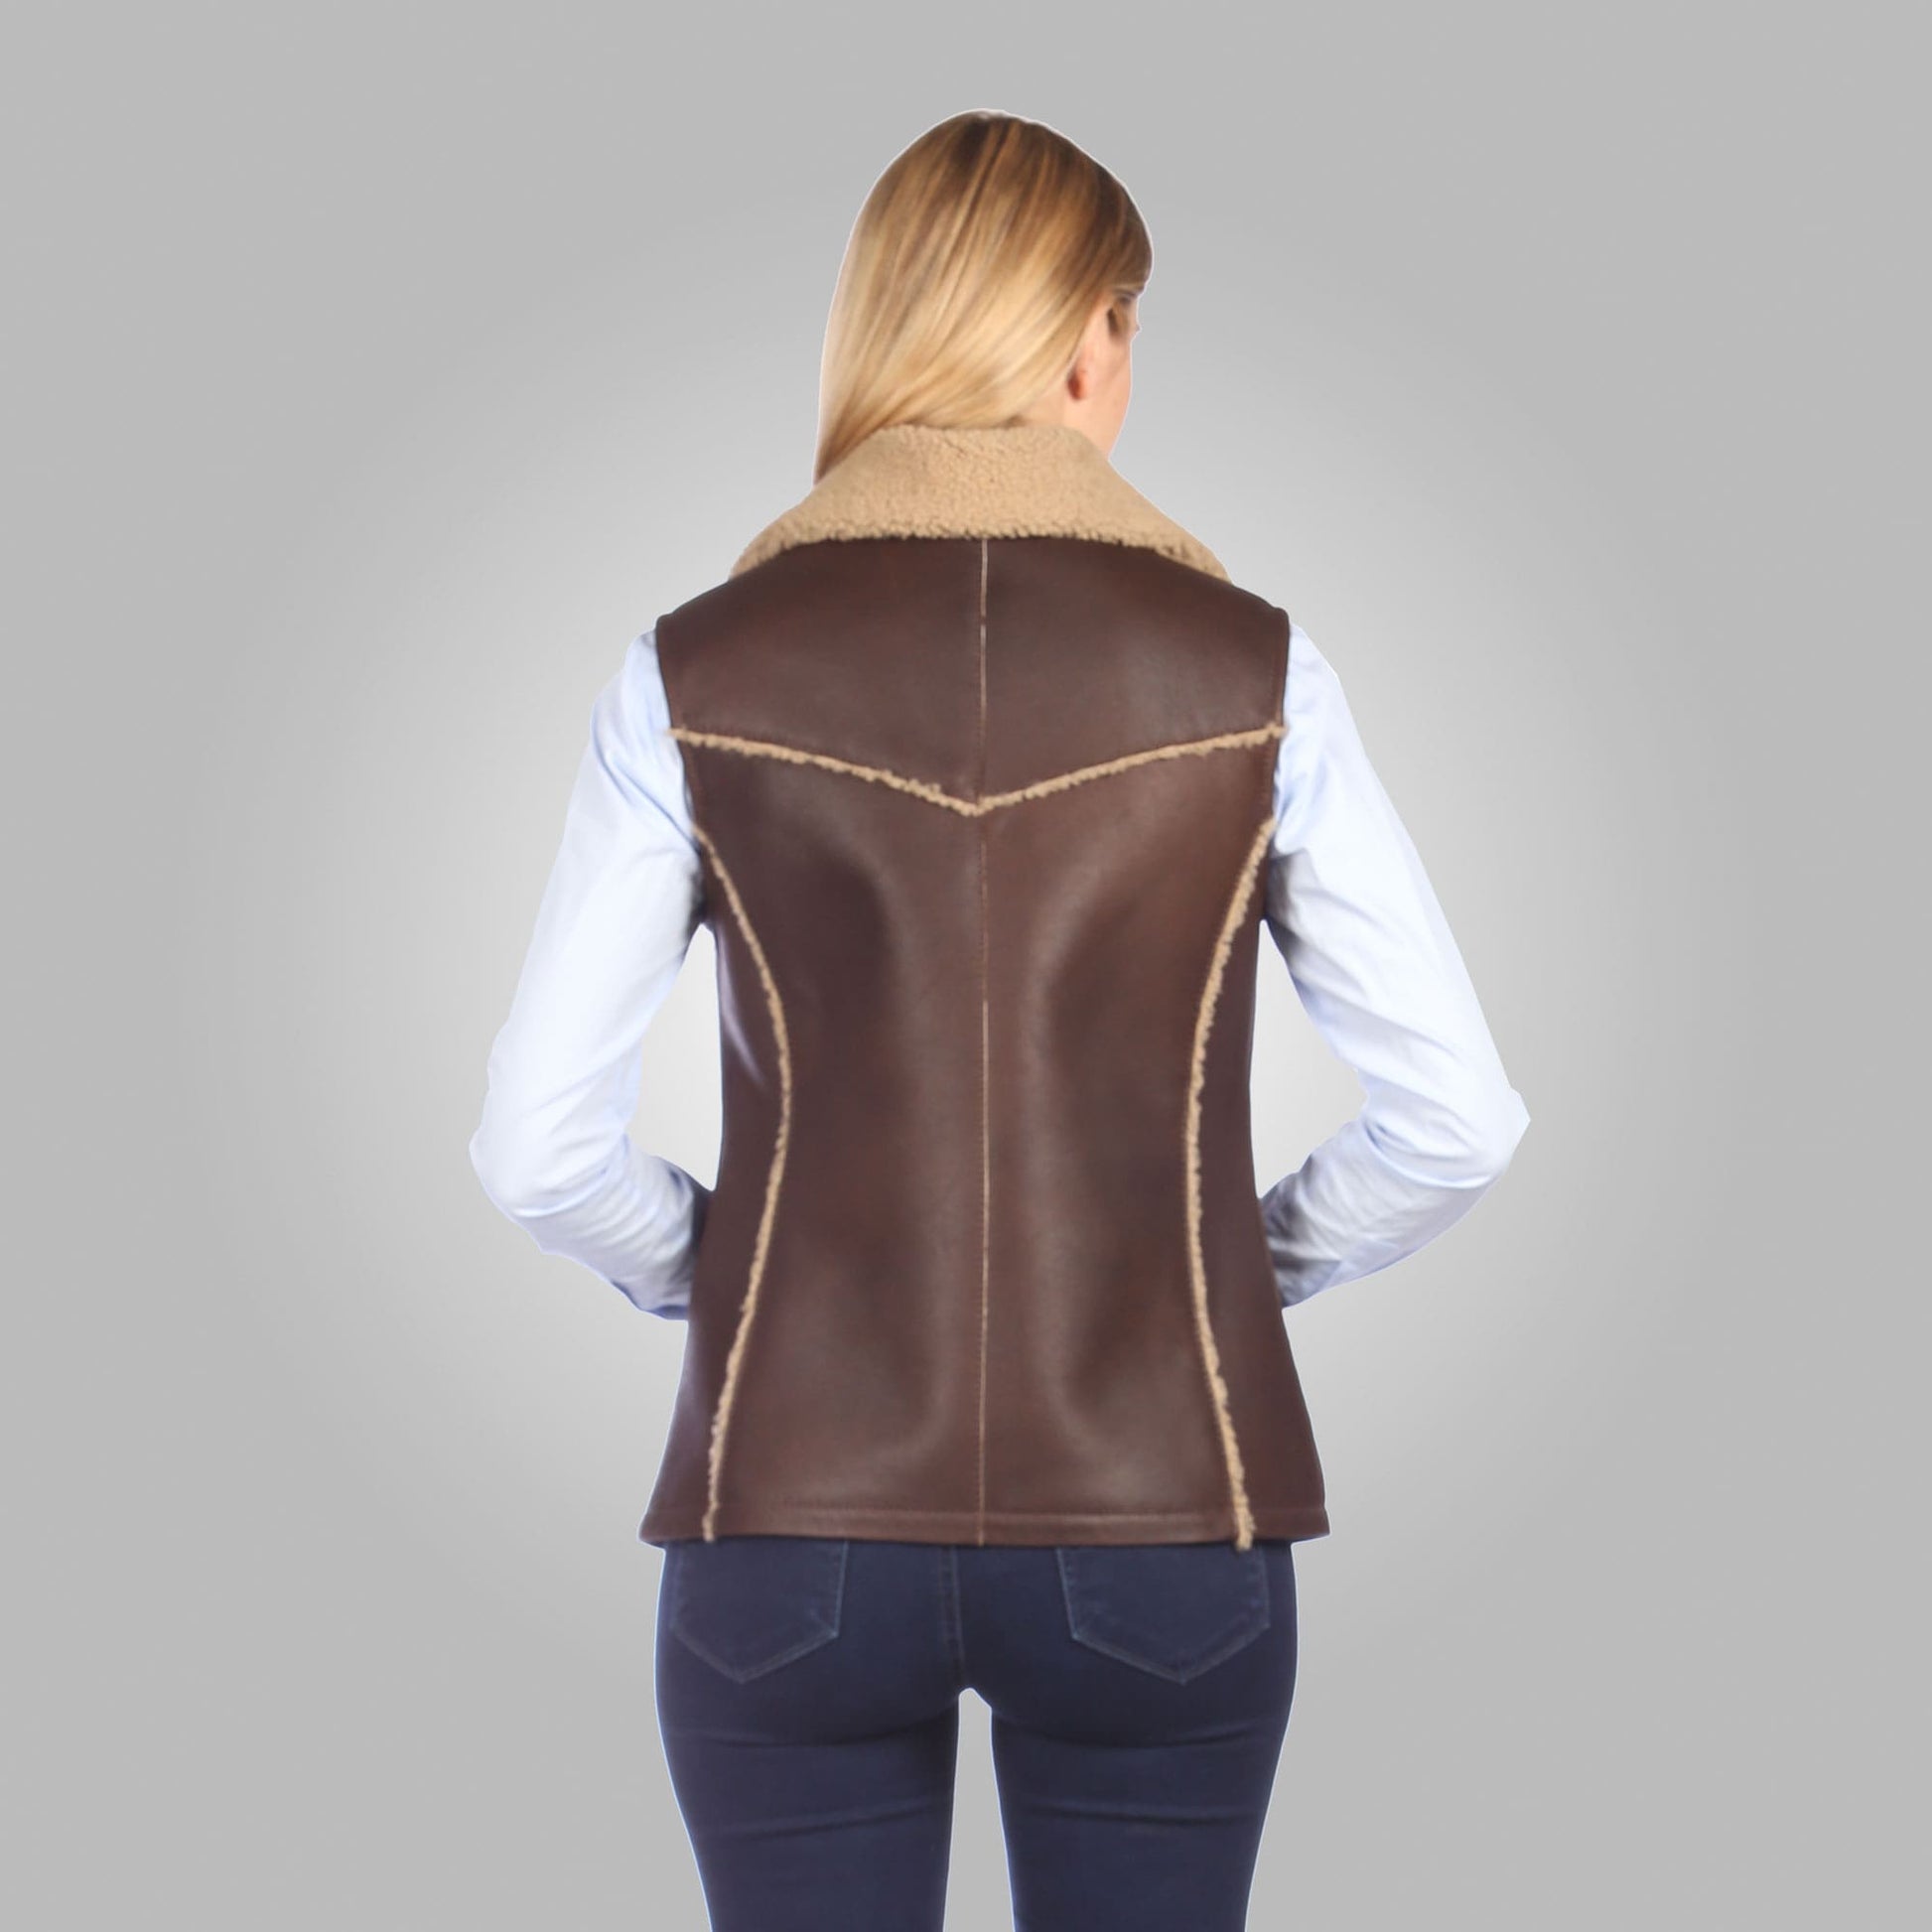 Women's Shearling Leather Vest In Chocolate Brown